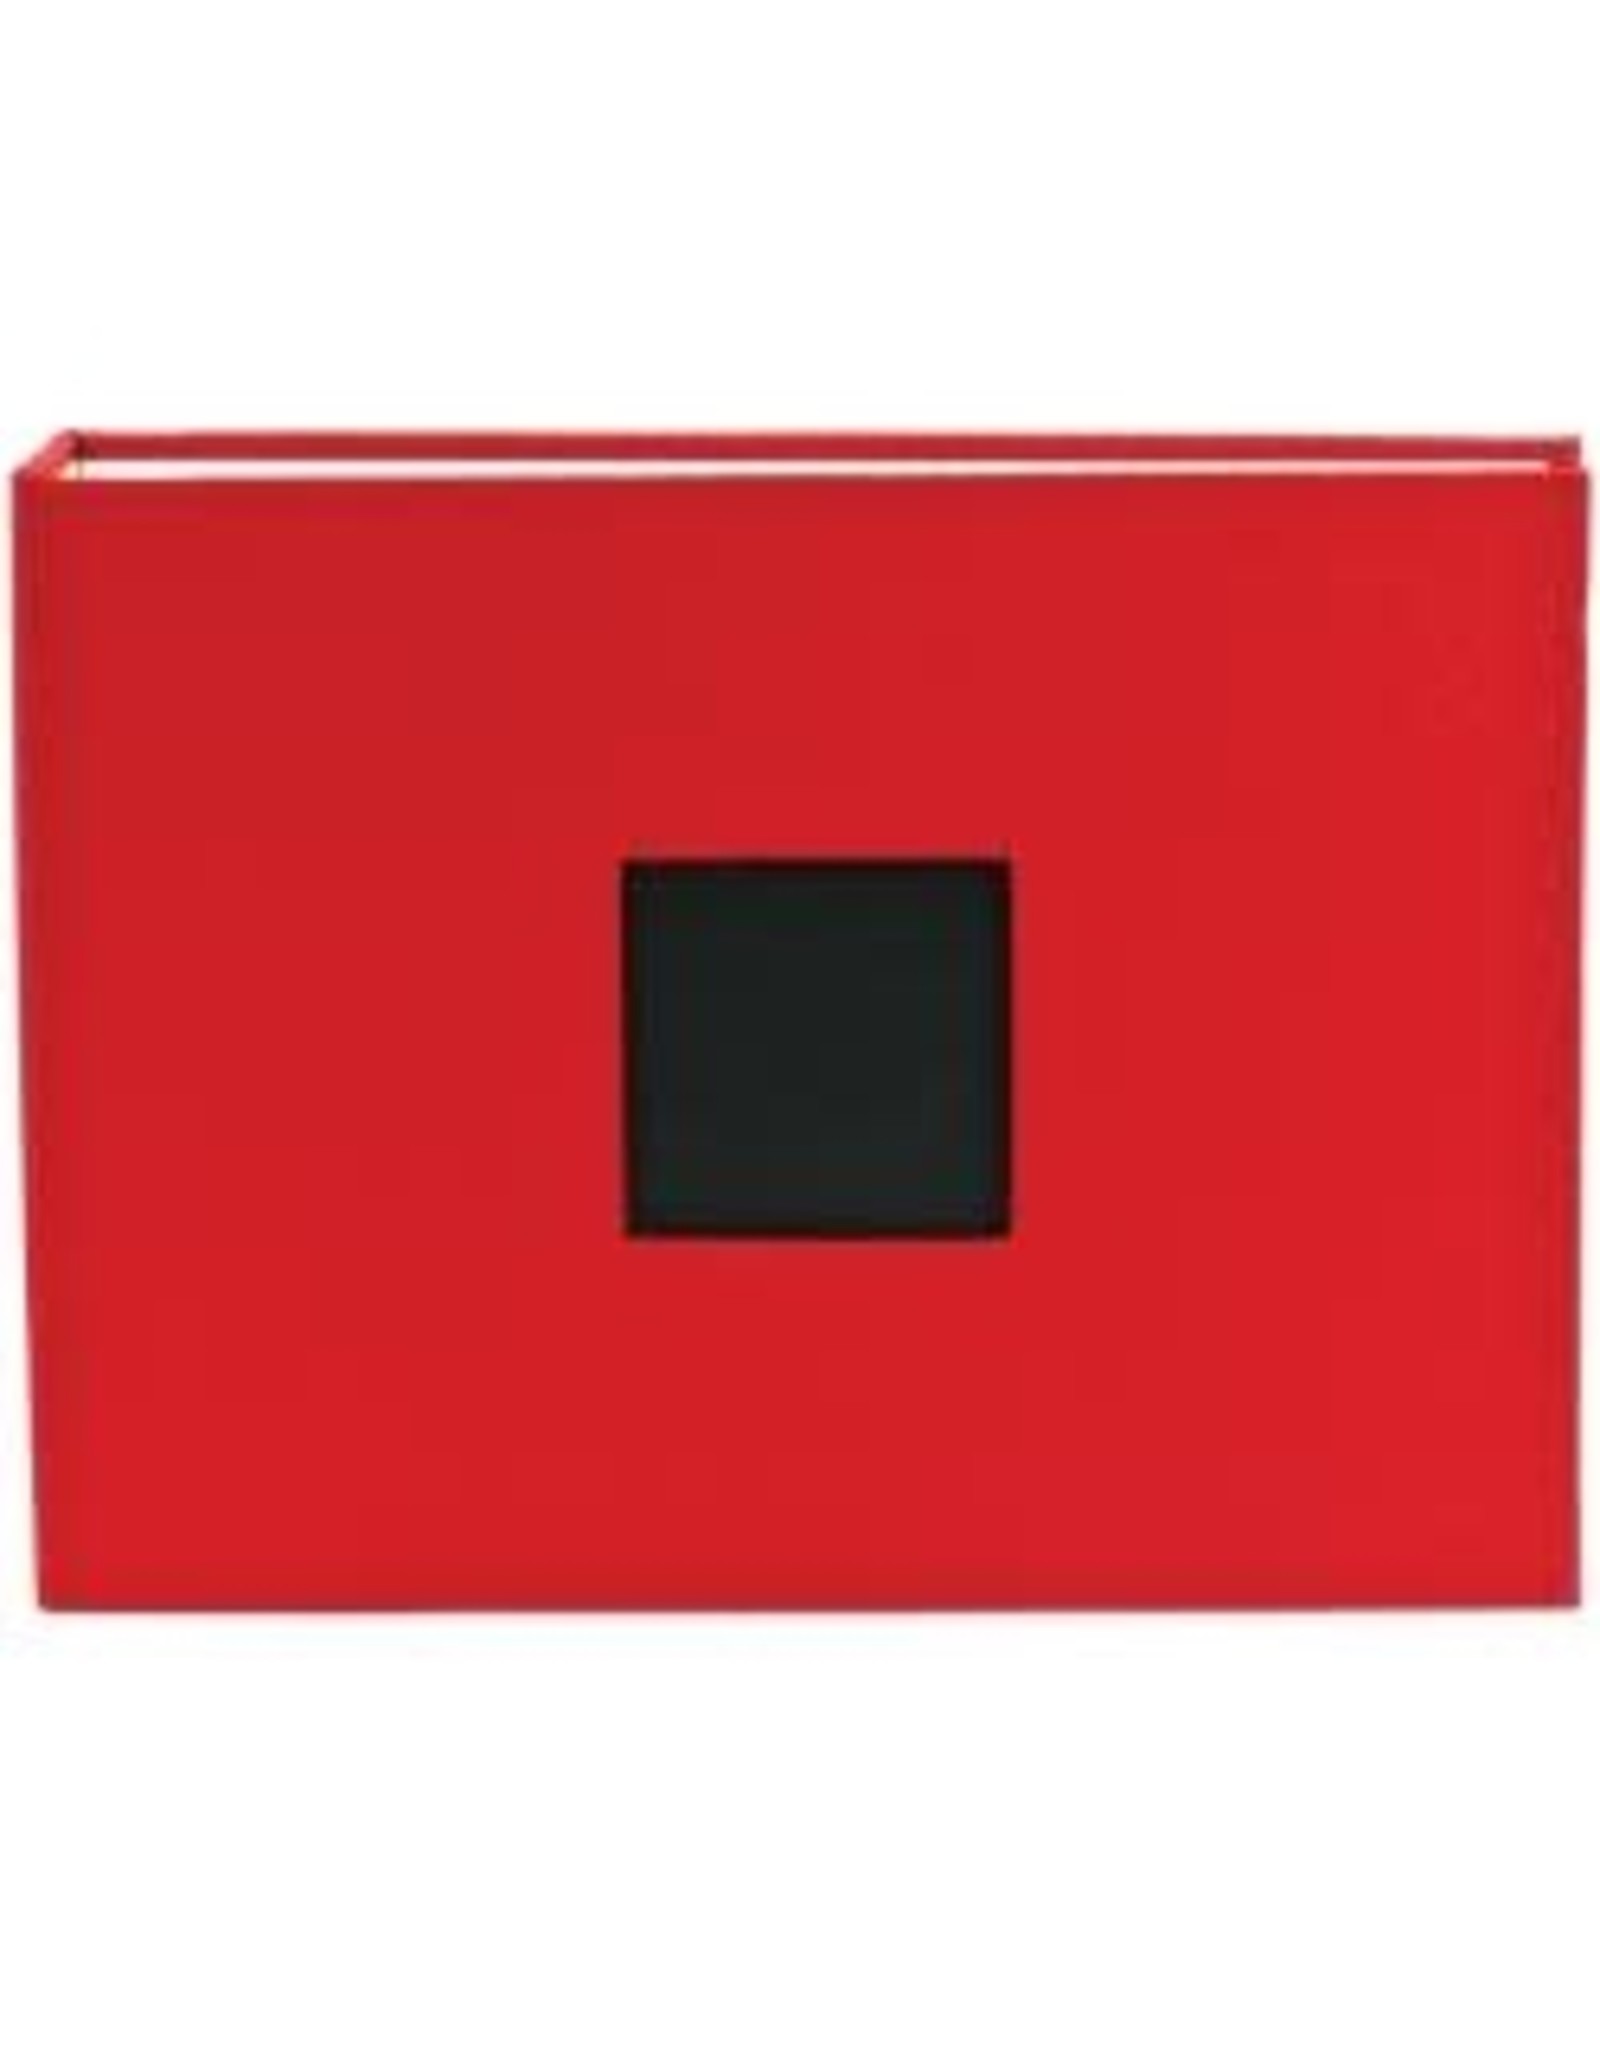 AMERICAN CRAFTS AMERICAN CRAFTS D-RING RED CLOTH ALBUM 8X8